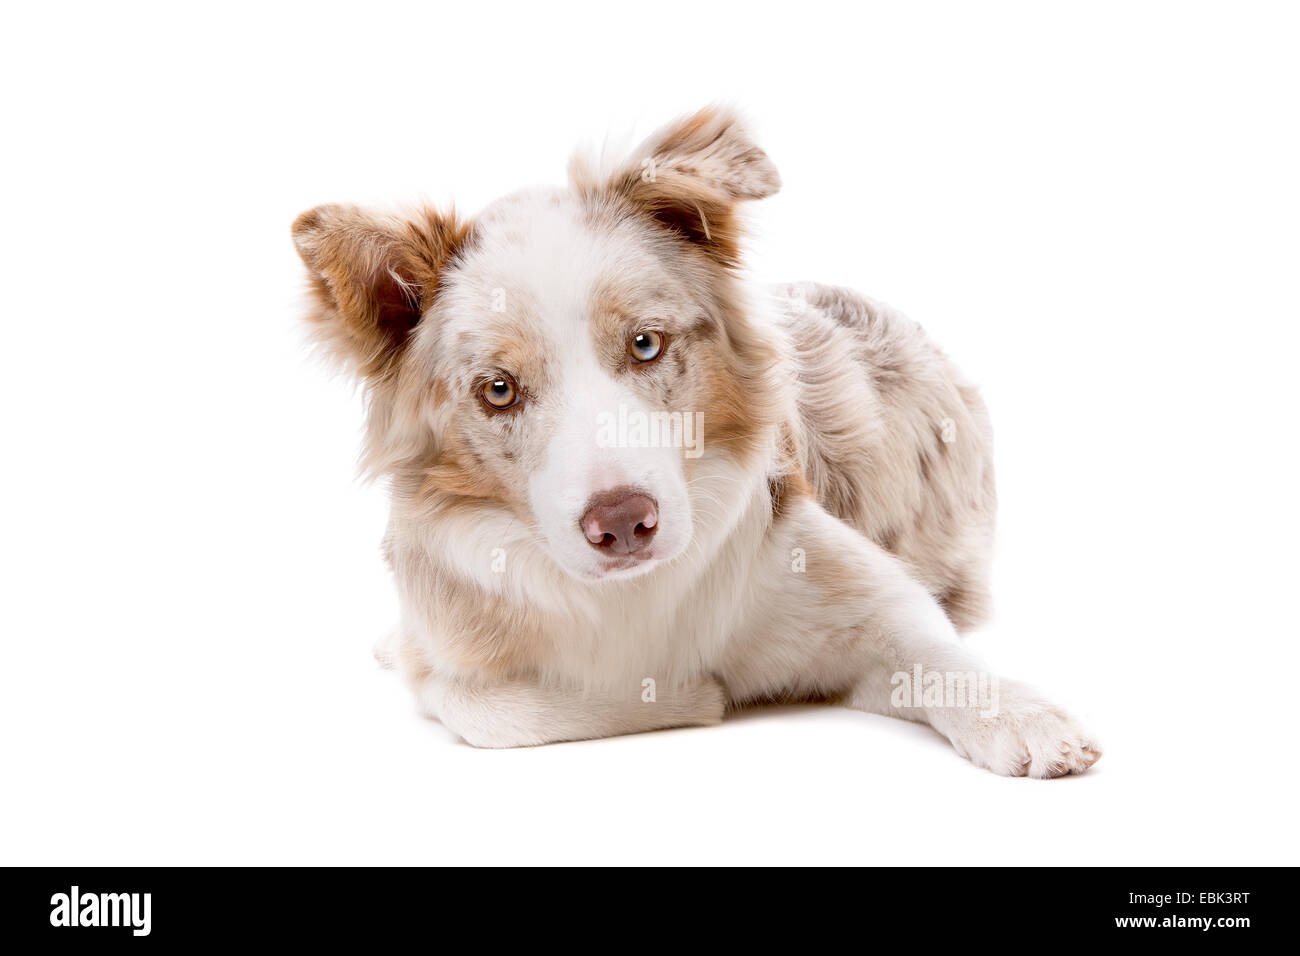 border collie dog in front of a white background Stock Photo